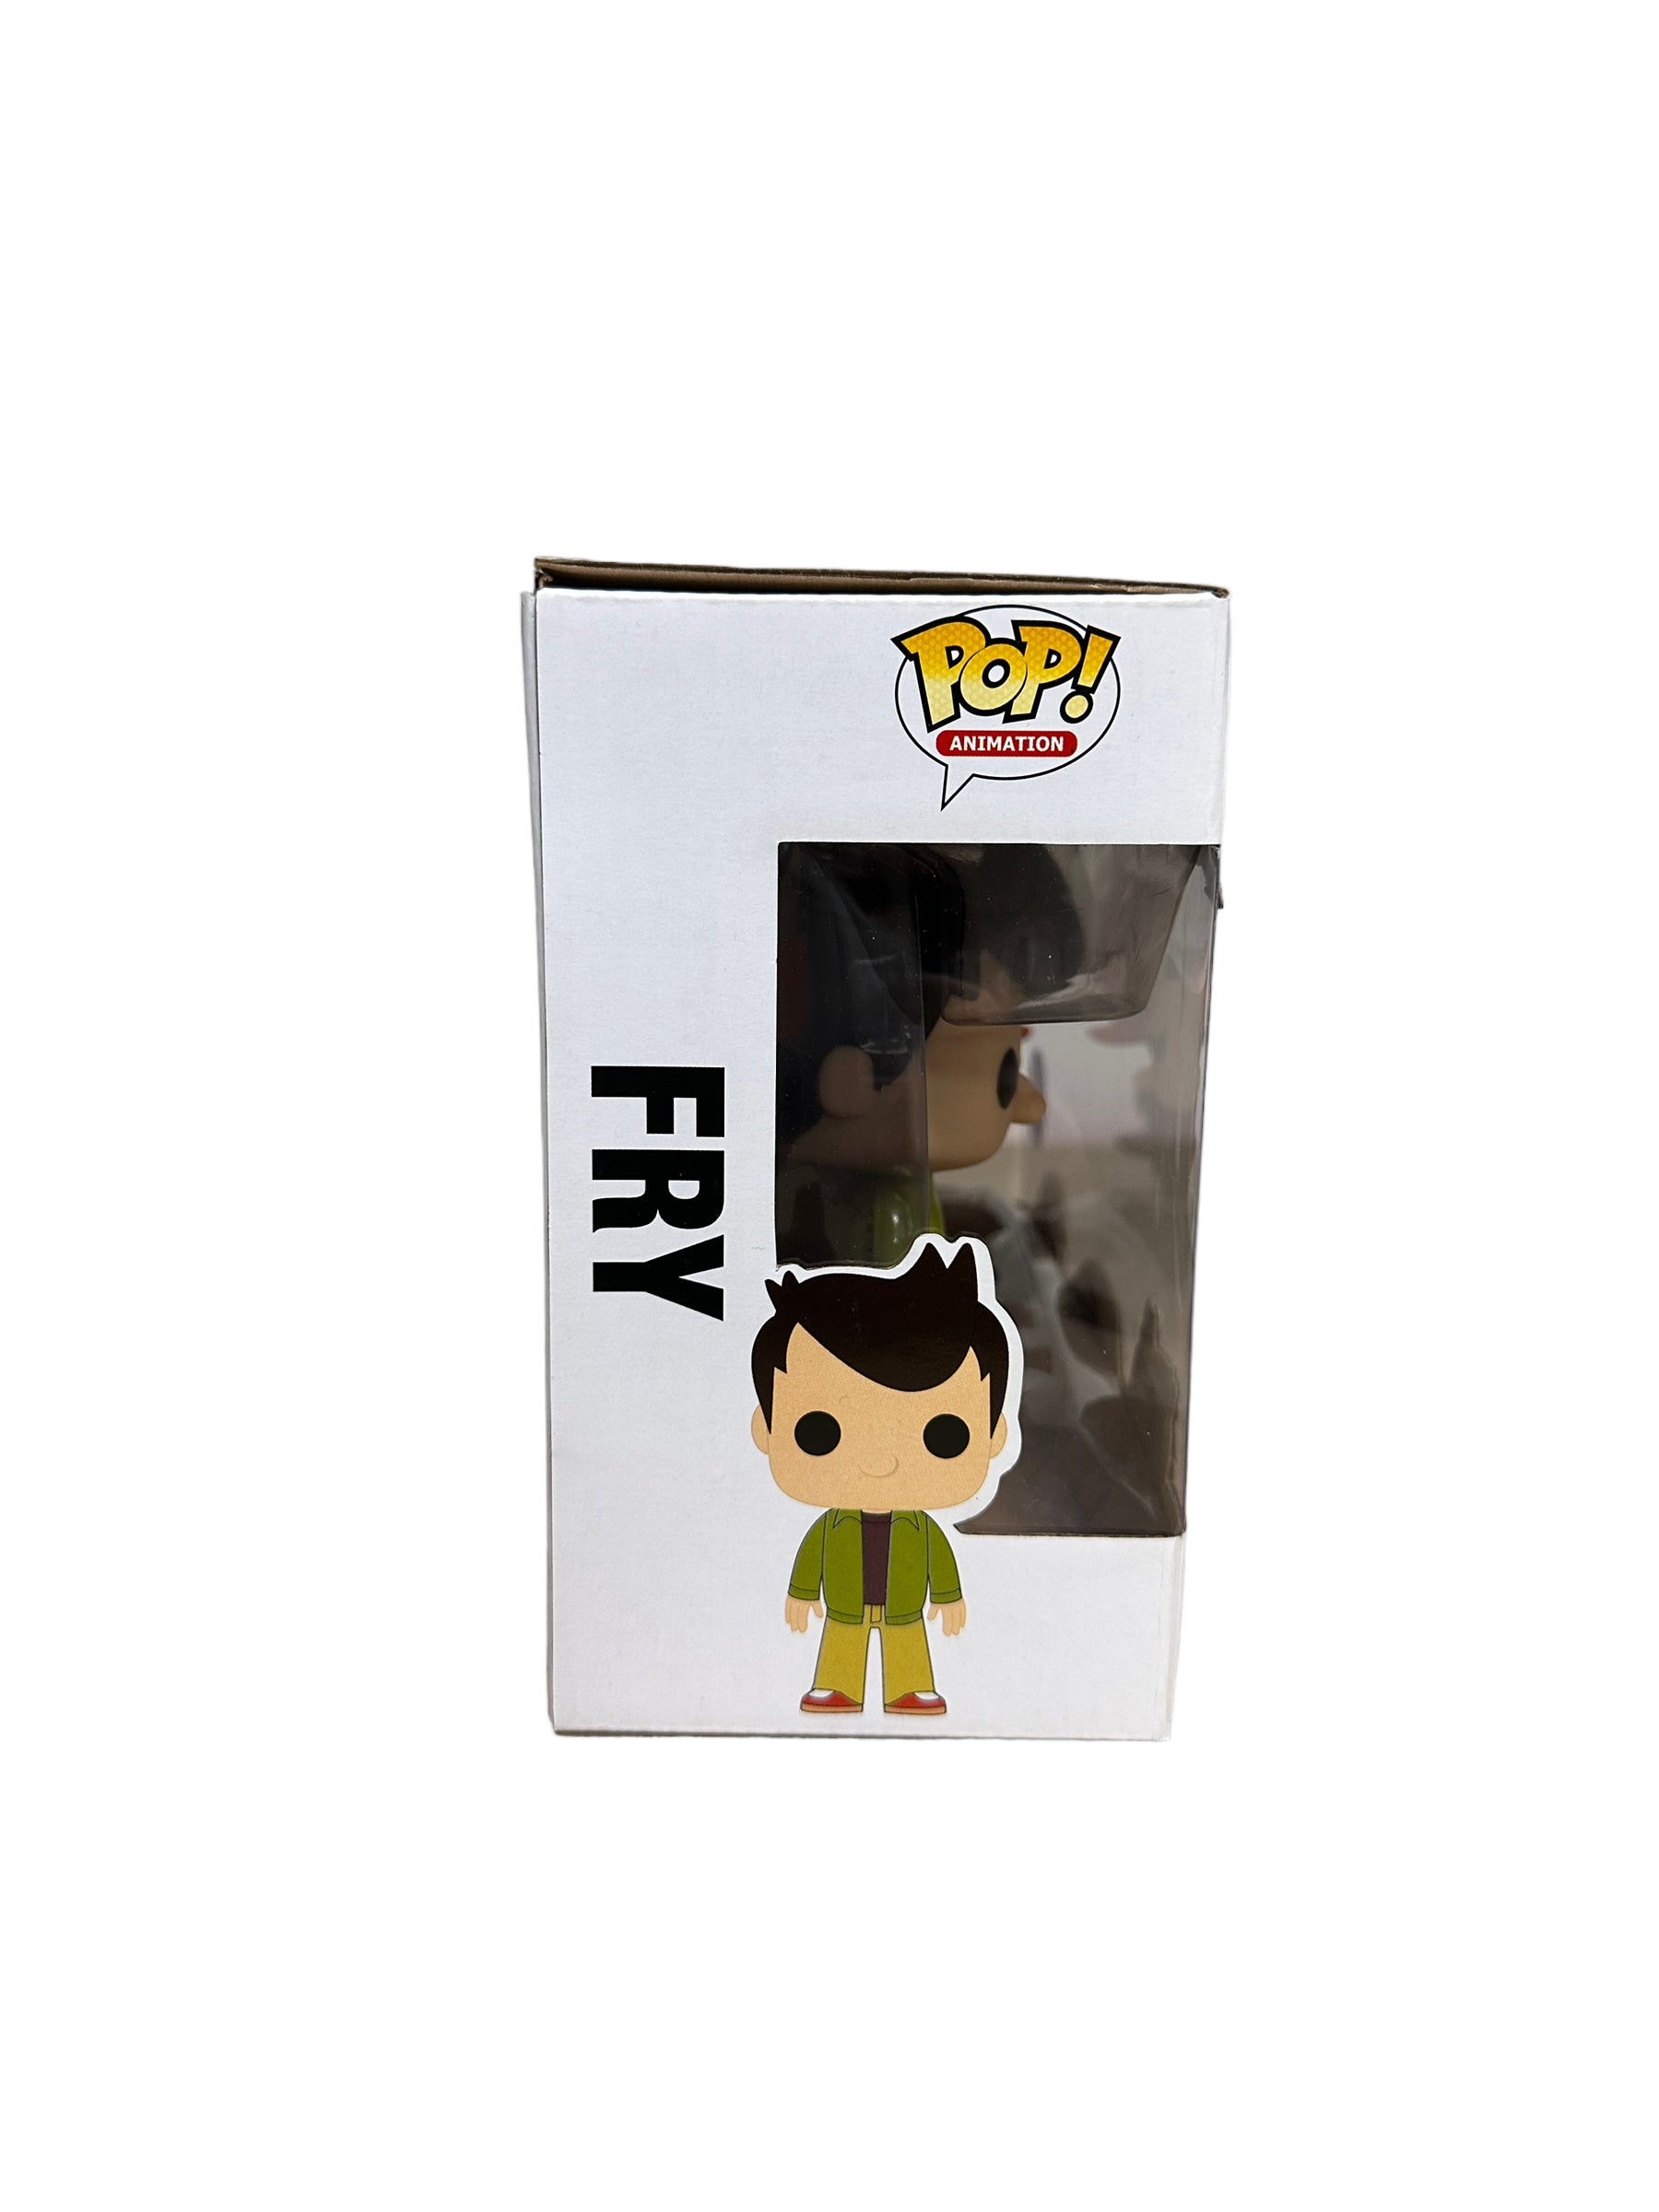 Alternate Universe Fry and Leela 2 Pack Funko Pop! - Futurama - NYCC 2015 Exclusive LE750 Pcs - Condition 8.5/10